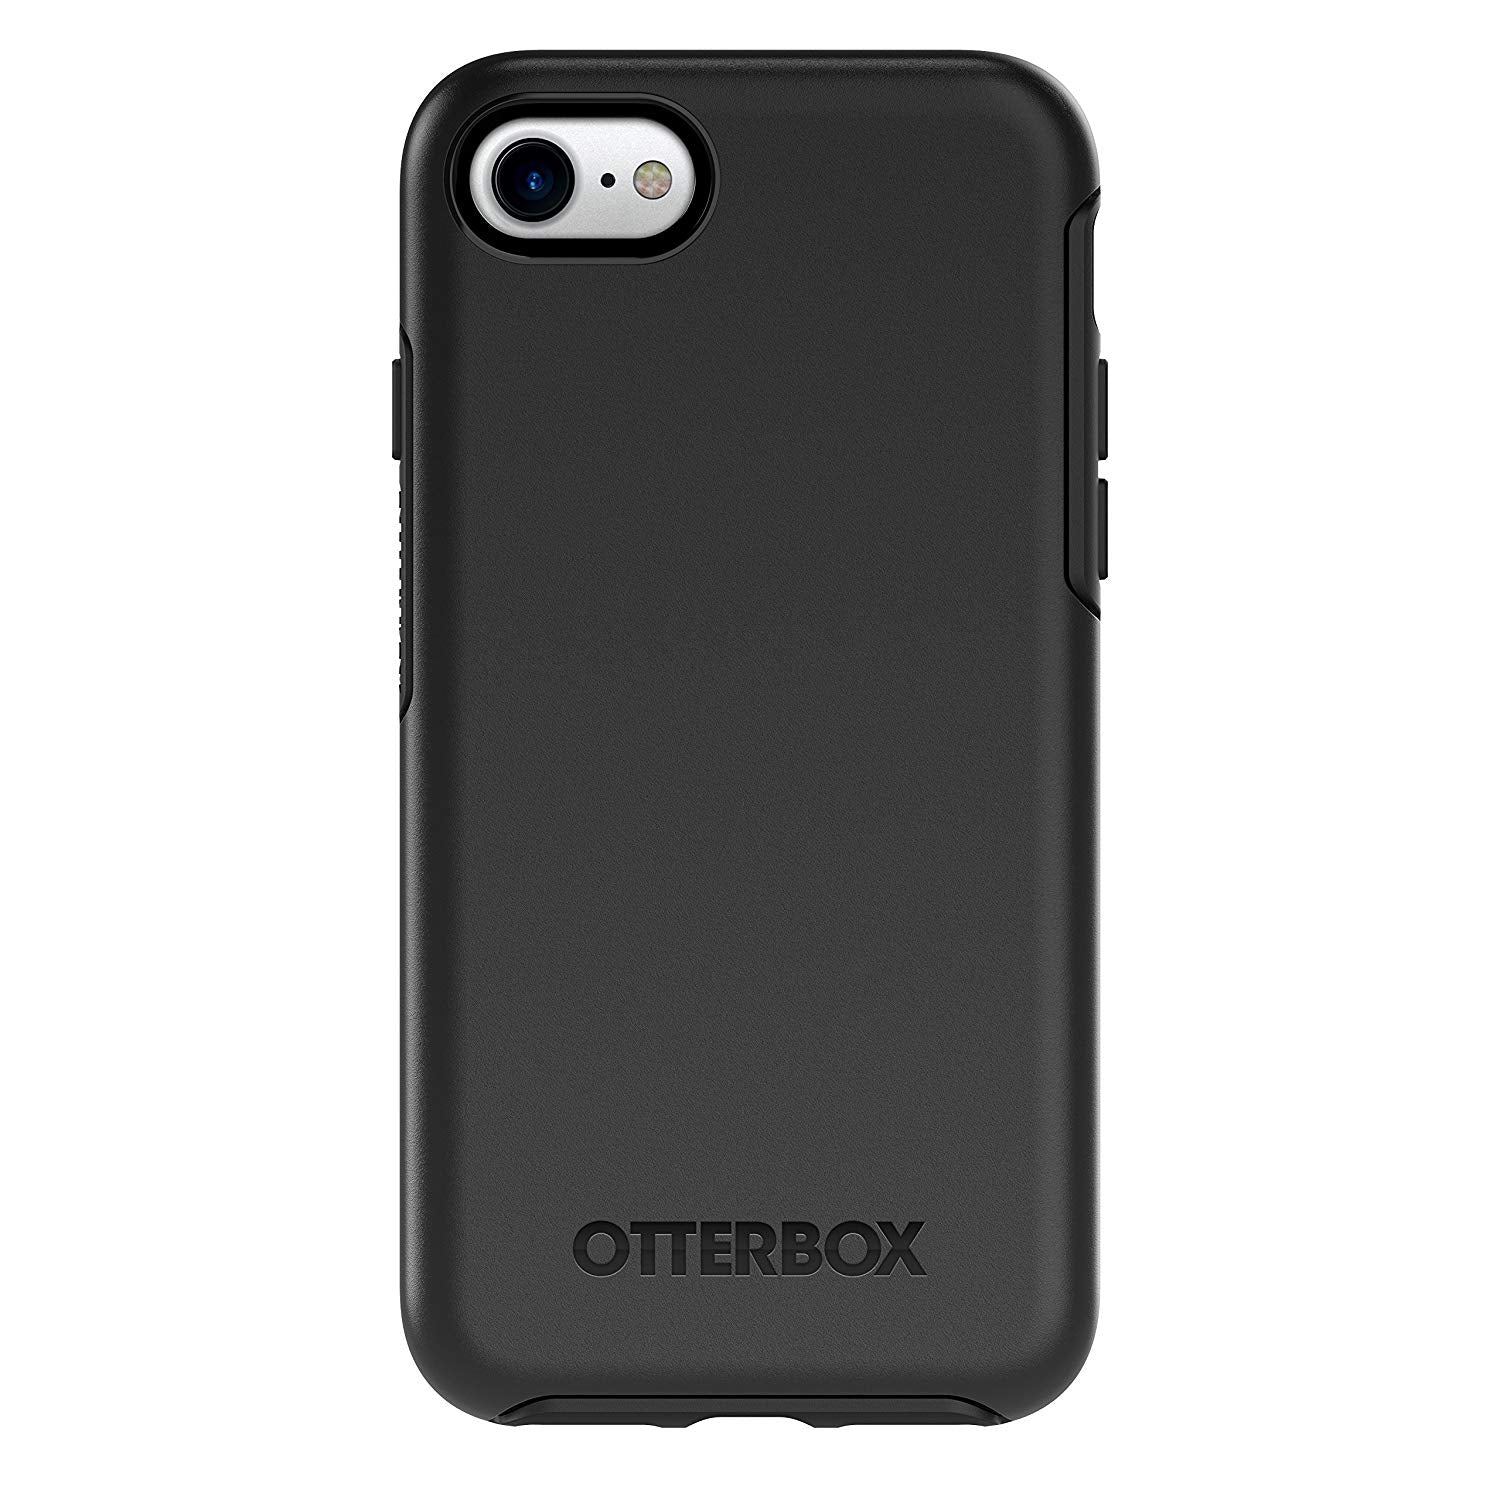 OtterBox SYMMETRY SERIES Case for iPhone 7 / iPhone 8 - Black (Certified Refurbished)